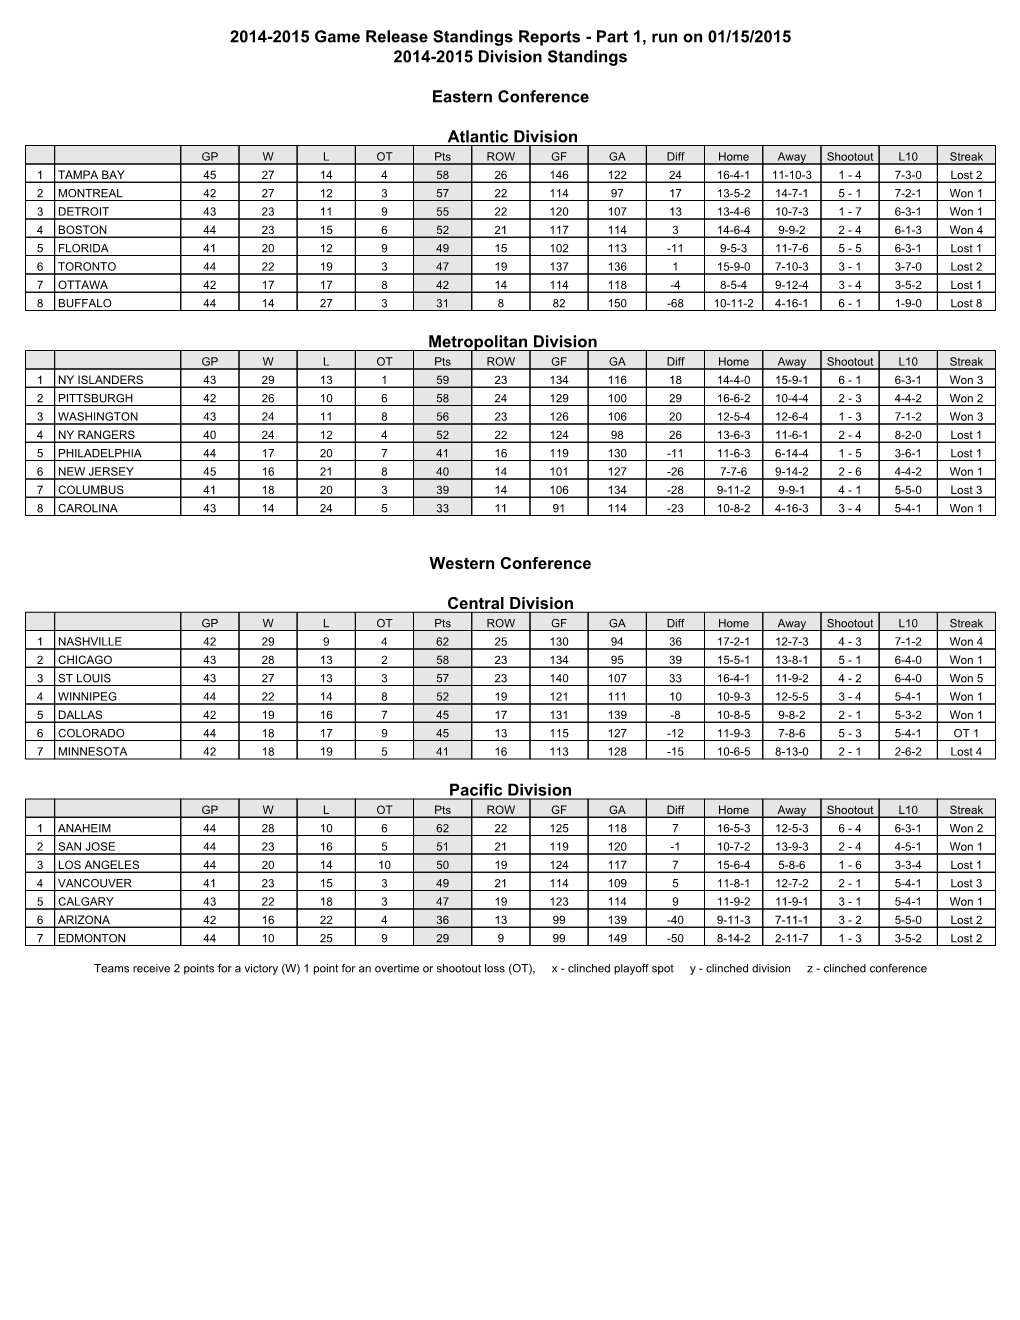 2014-2015 Game Release Standings Reports - Part 1, Run on 01/15/2015 2014-2015 Division Standings